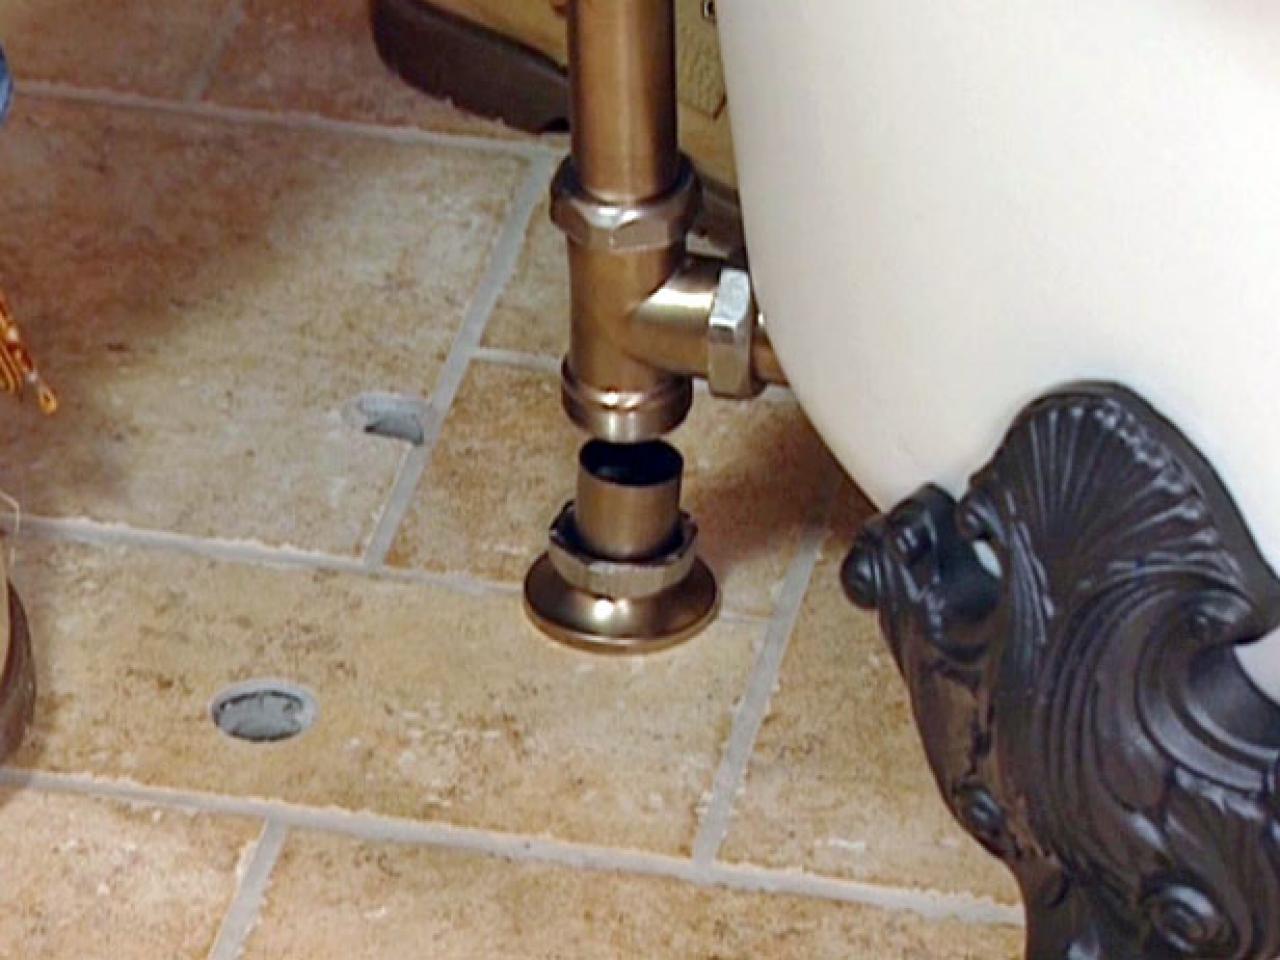 Install Plumbing For A Claw Foot Tub, Install A New Bathtub Stopper